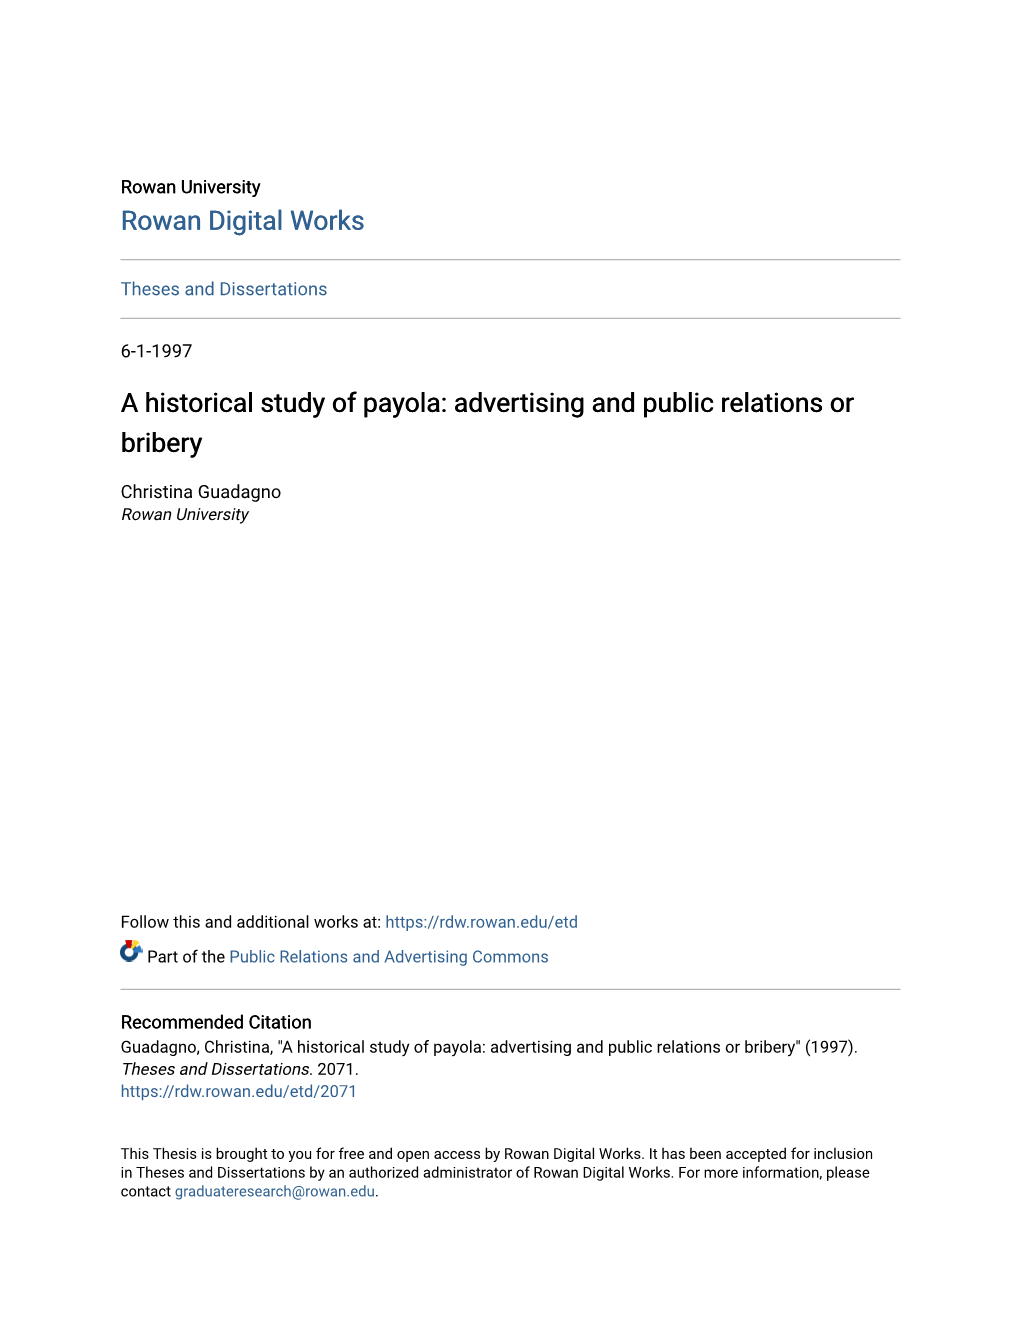 A Historical Study of Payola: Advertising and Public Relations Or Bribery